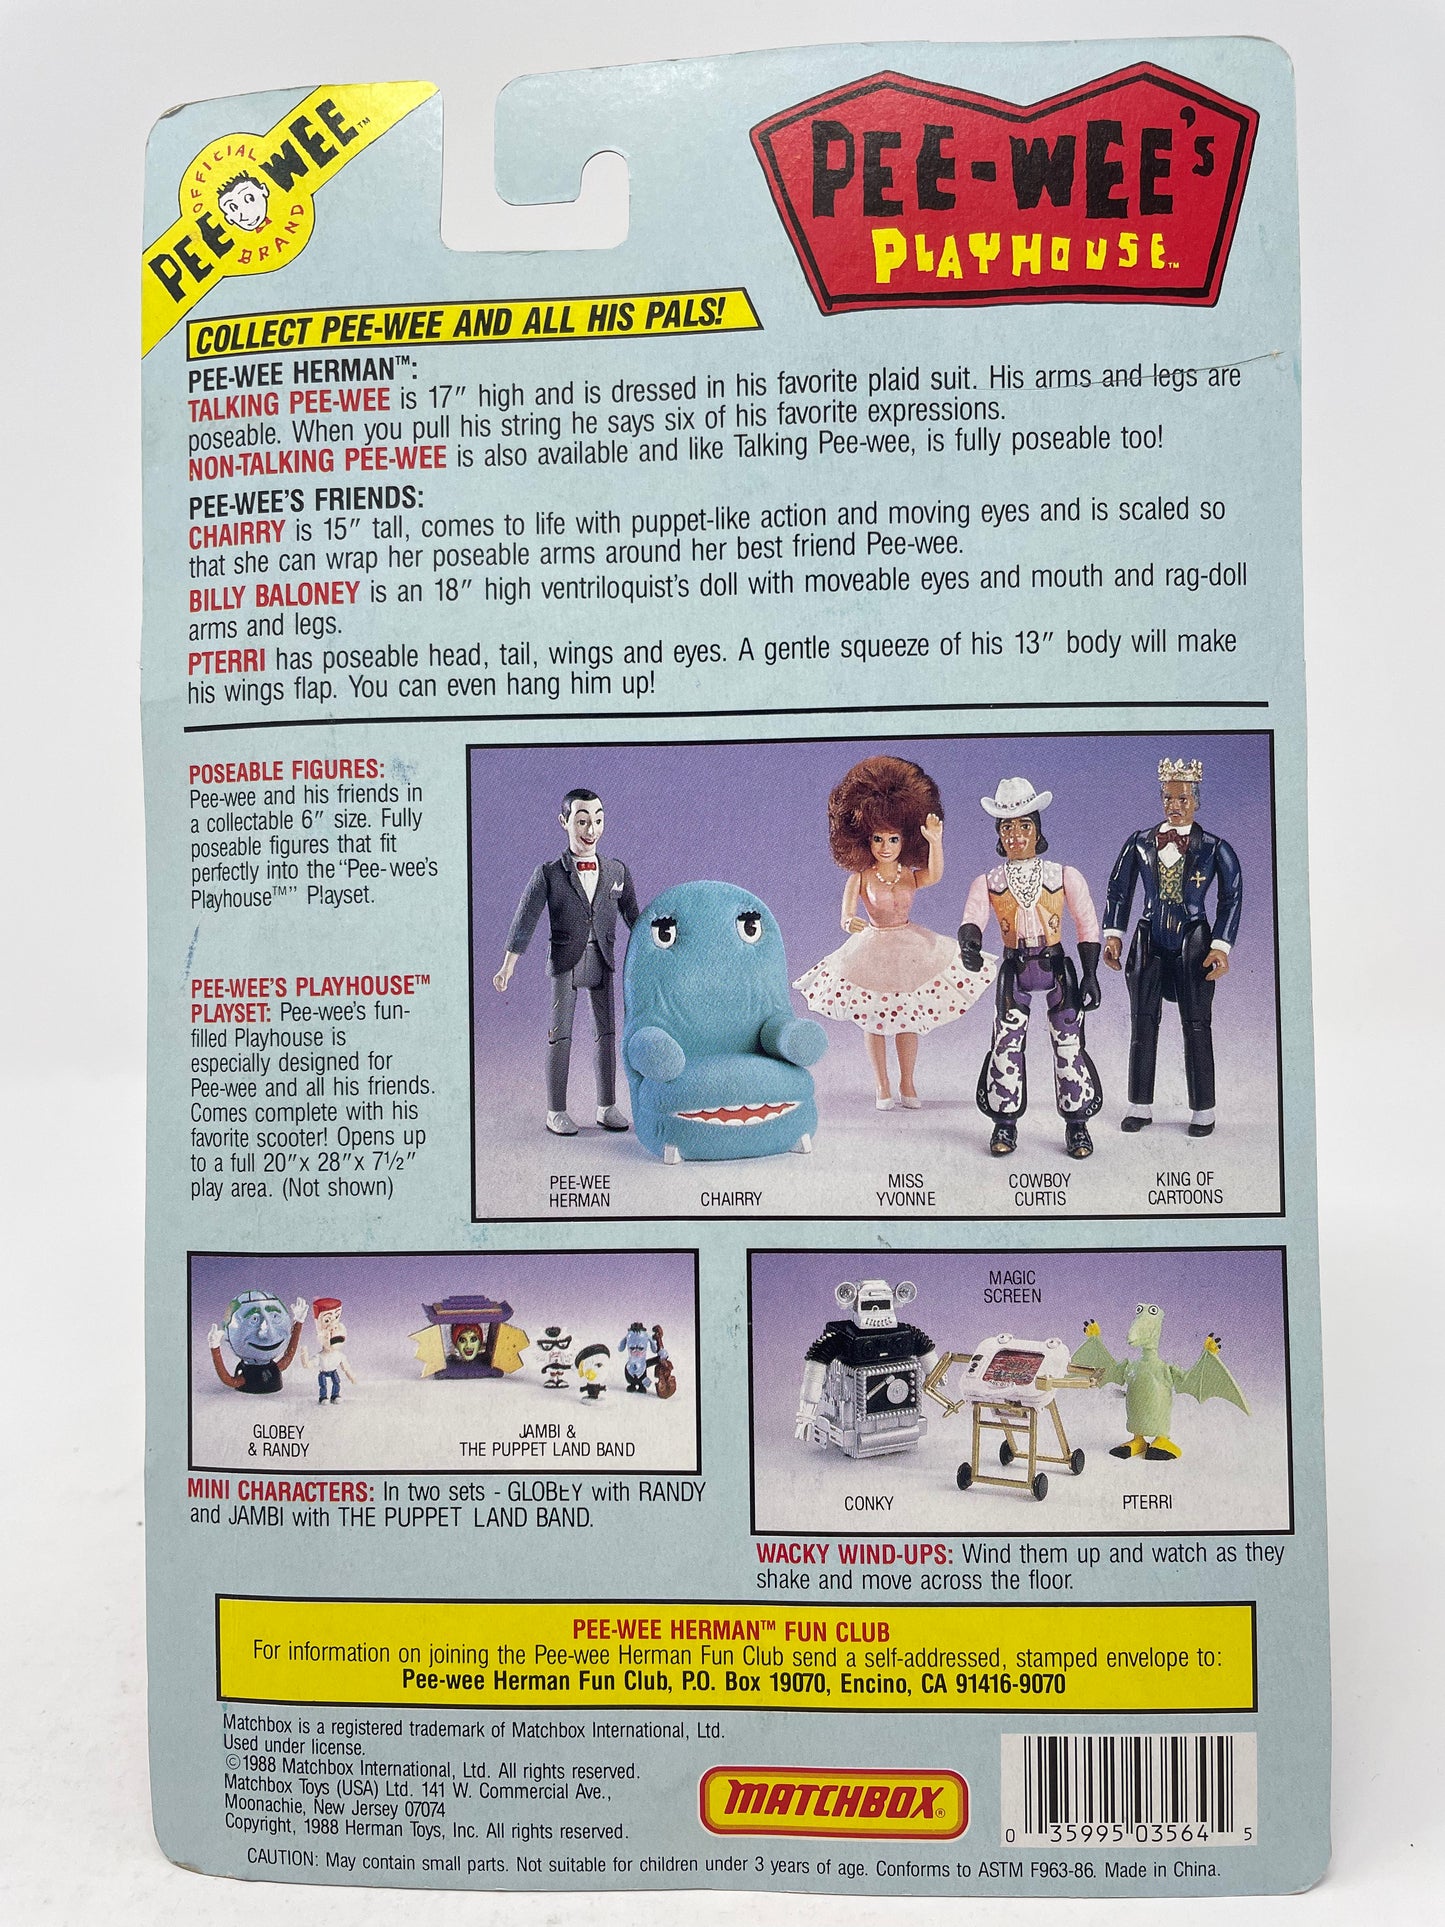 THE KING OF CARTOONS - PEE WEE'S PLAYHOUSE - 1988 MATCHBOX (2 OF 2)